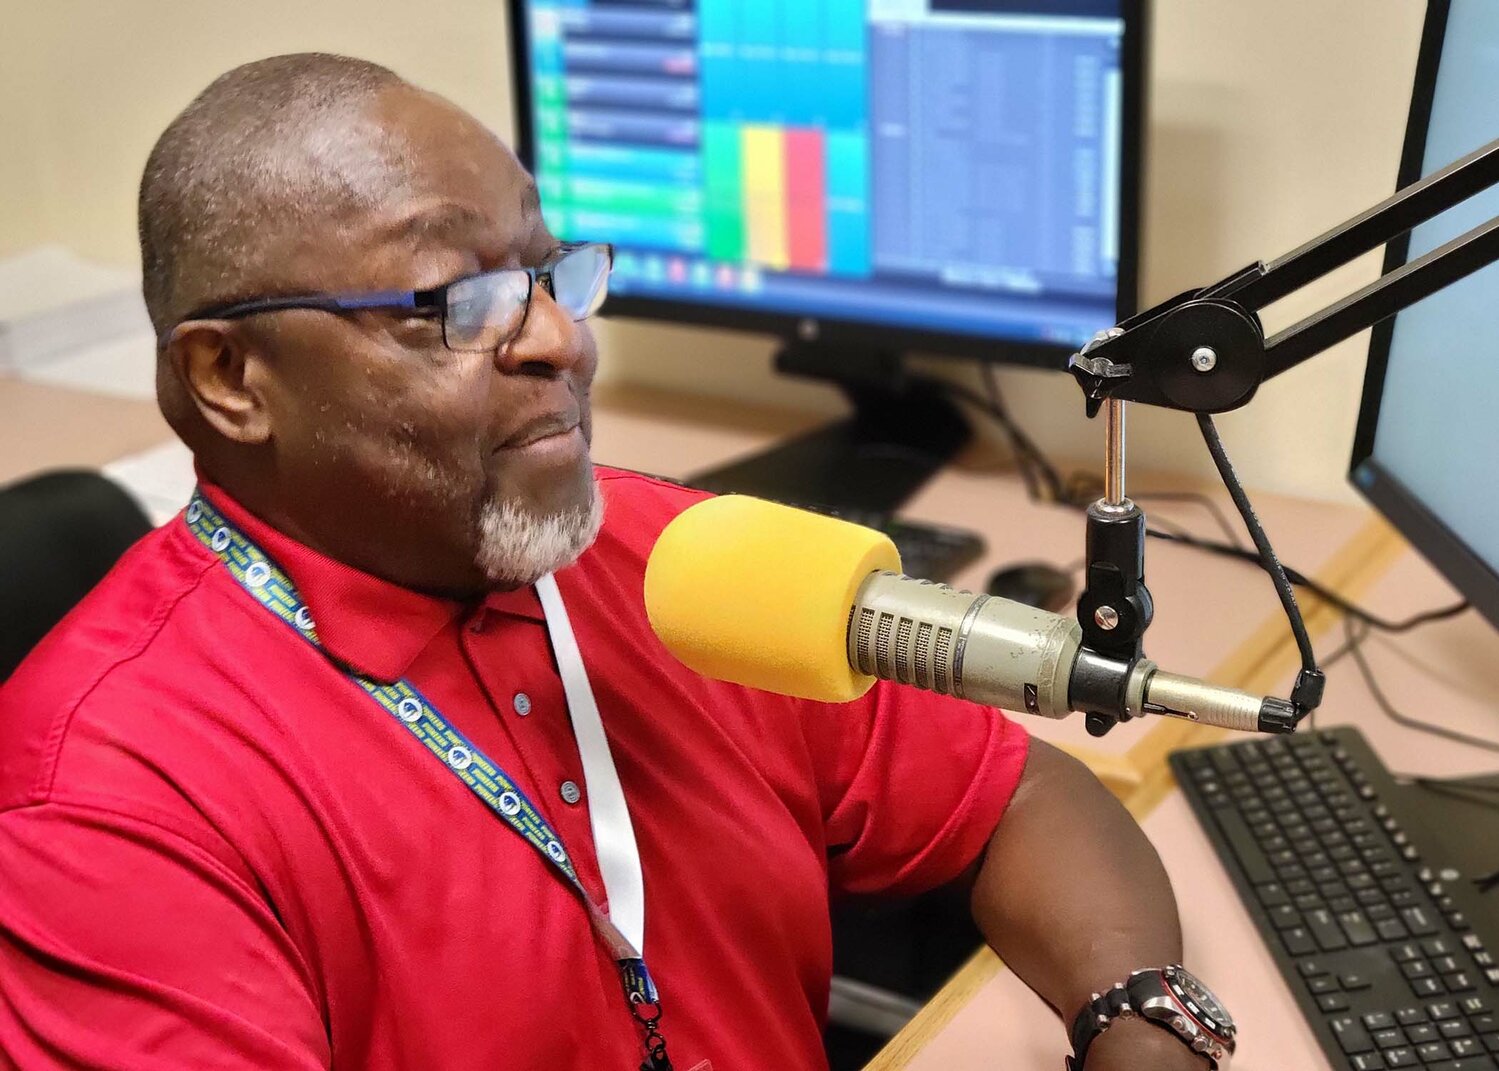 Michael James is the host of the "Mighty Michel Morning Show" on the new Q 91.1 FM.